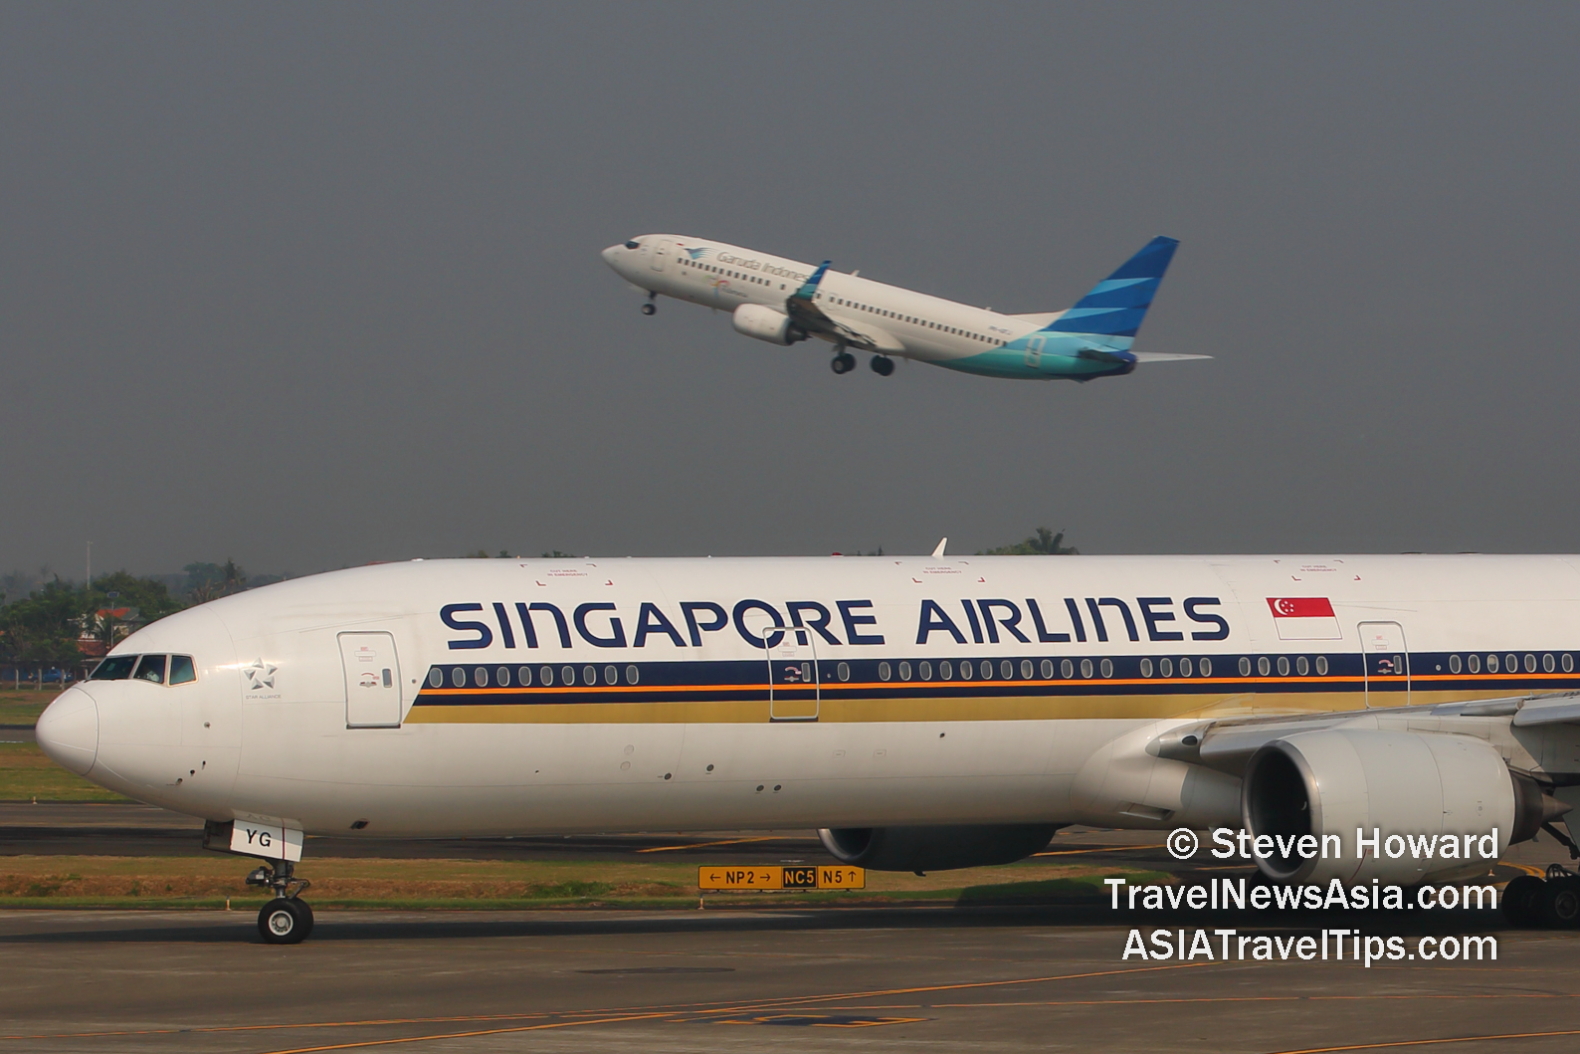 SIA B777 reg: 9V-SYG with a Garuda Indonesia aircraft taking off in the background. Picture by Steven Howard of TravelNewsAsia.com Click to enlarge.